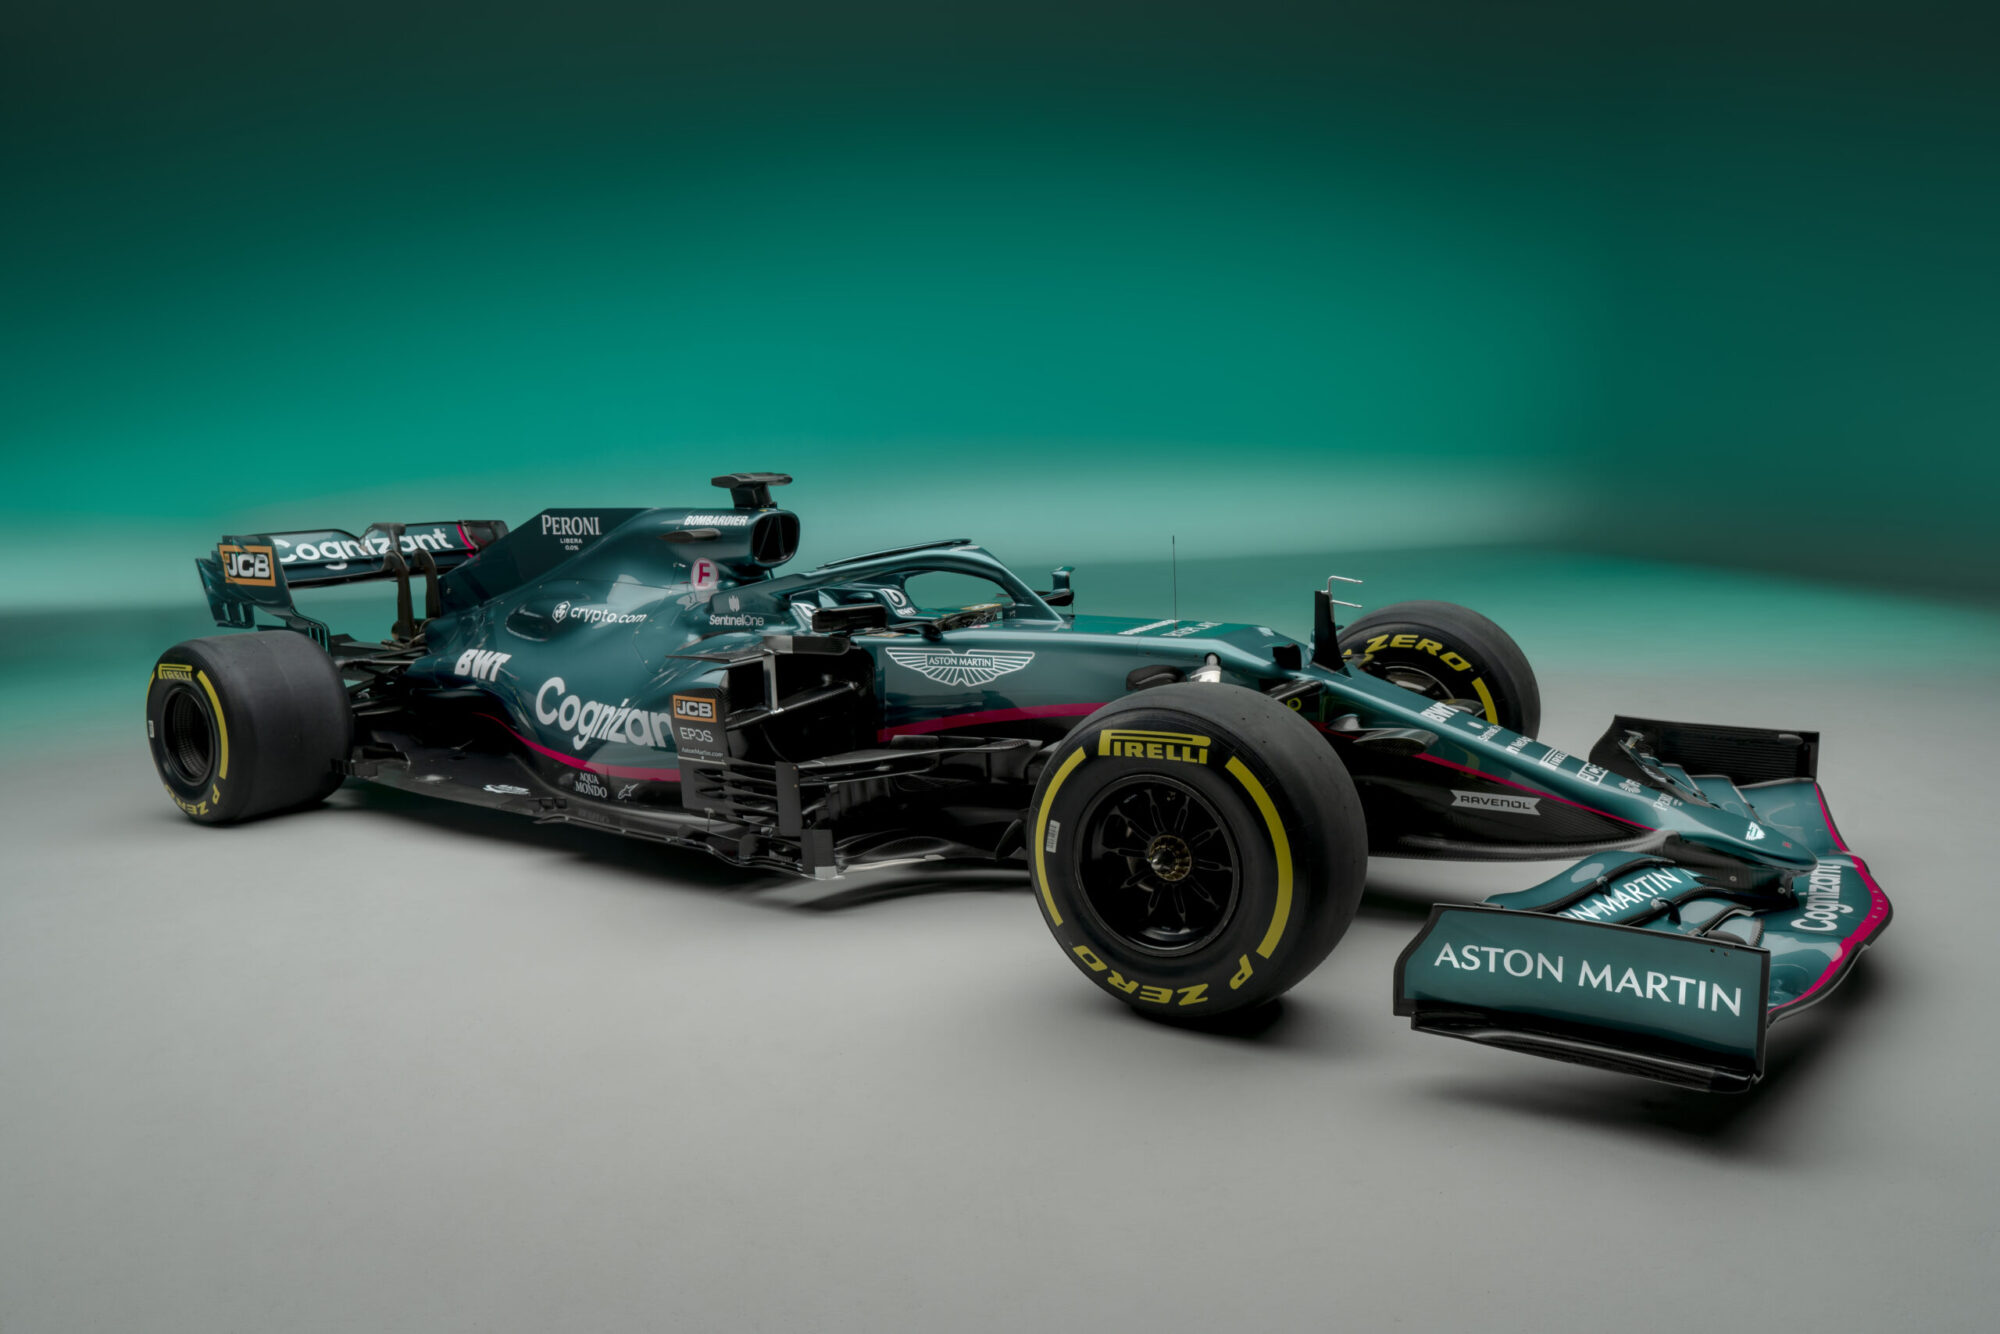 How commercial success has fuelled Aston Martin's on-track F1 speed